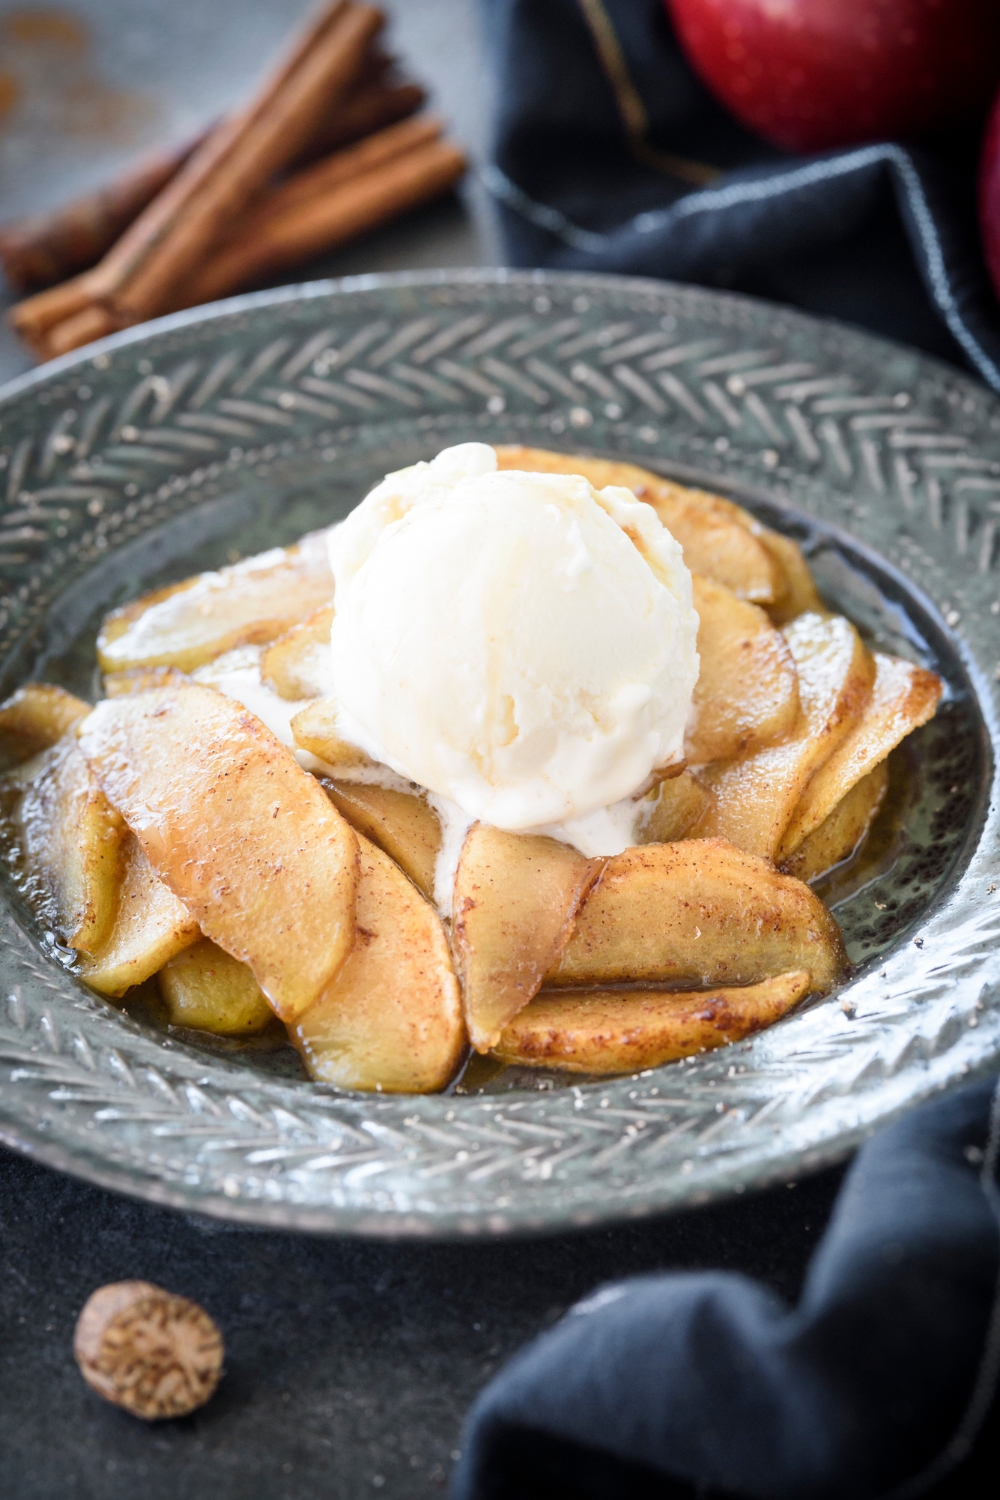 A blue bowl filled with baked apple slices coated in cinnamon topped with melting vanilla ice cream.